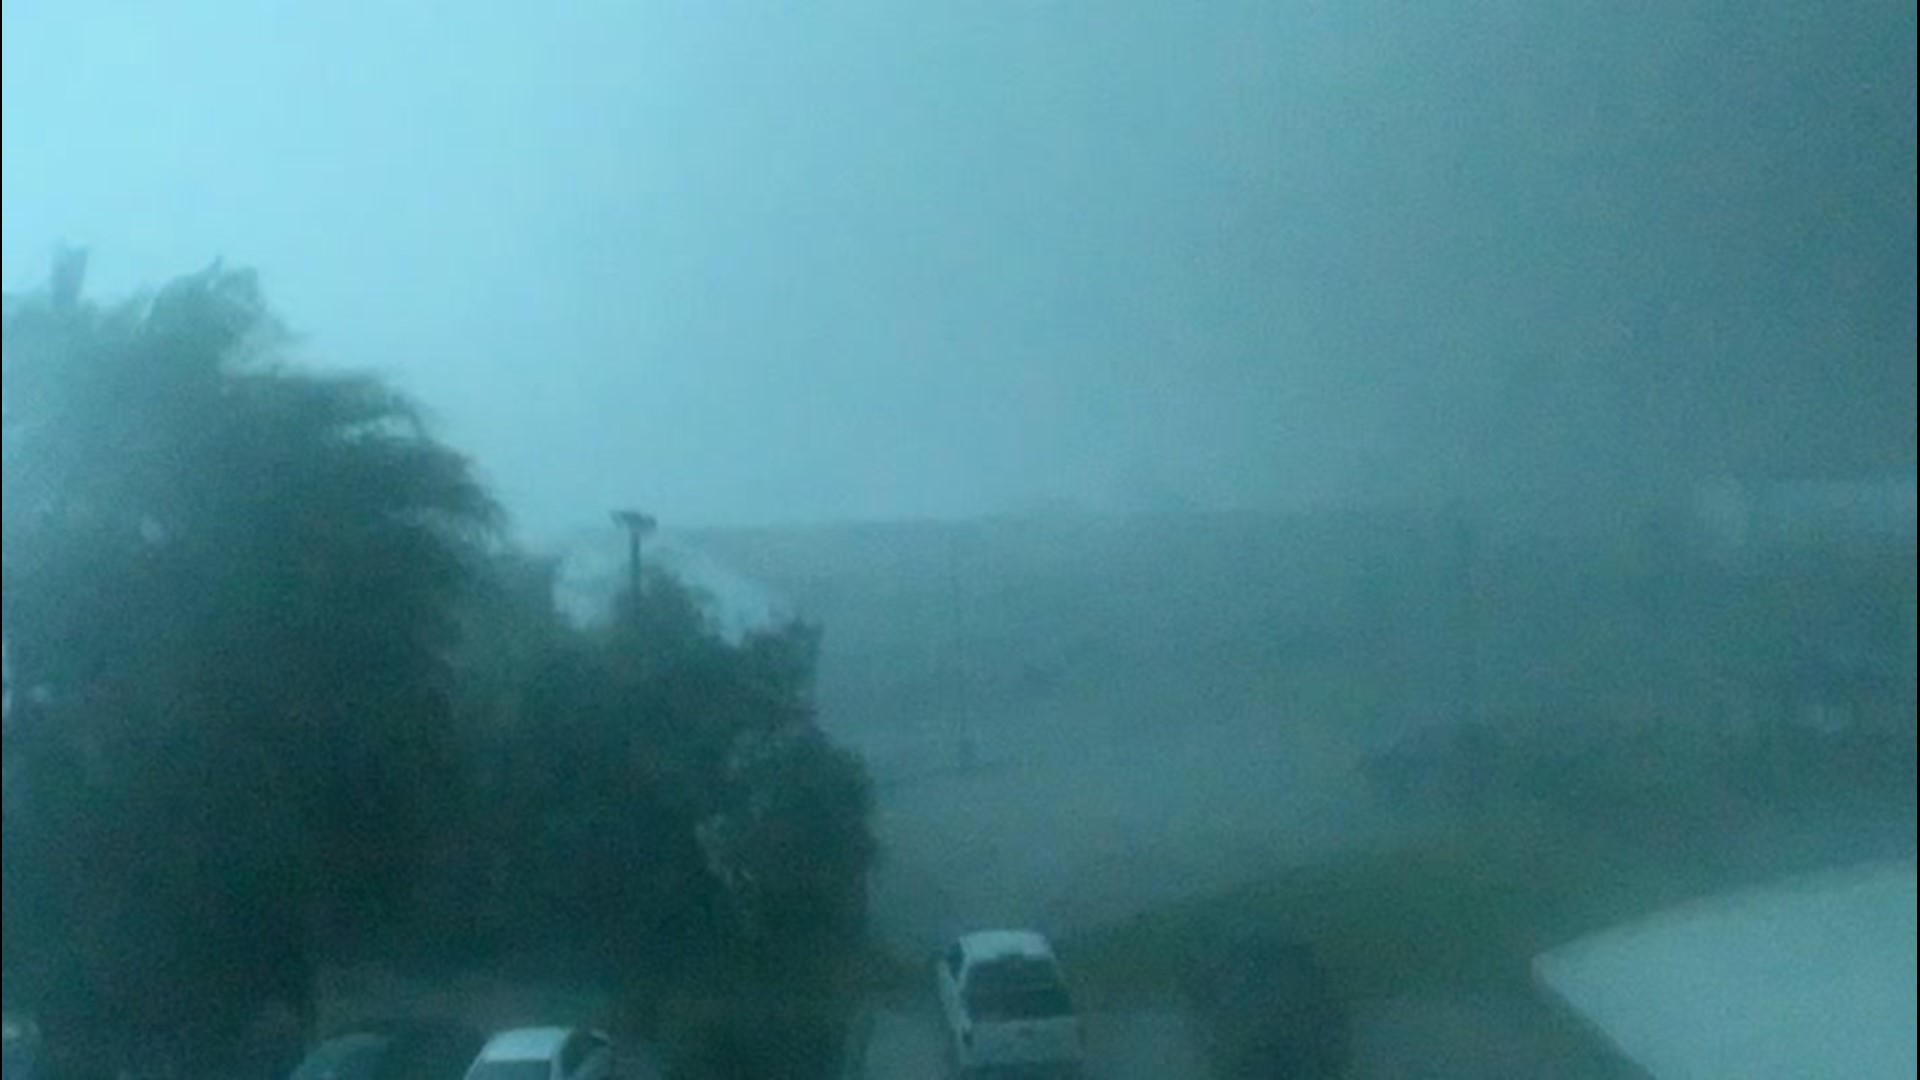 AccuWeather's Bill Wadell recorded from inside a hotel as Hurricane Laura lashed Sulphur, Louisiana, on Aug. 27. The storm's strong winds knocked the power out, while heavy wind and rain caused windows and doors to leak.